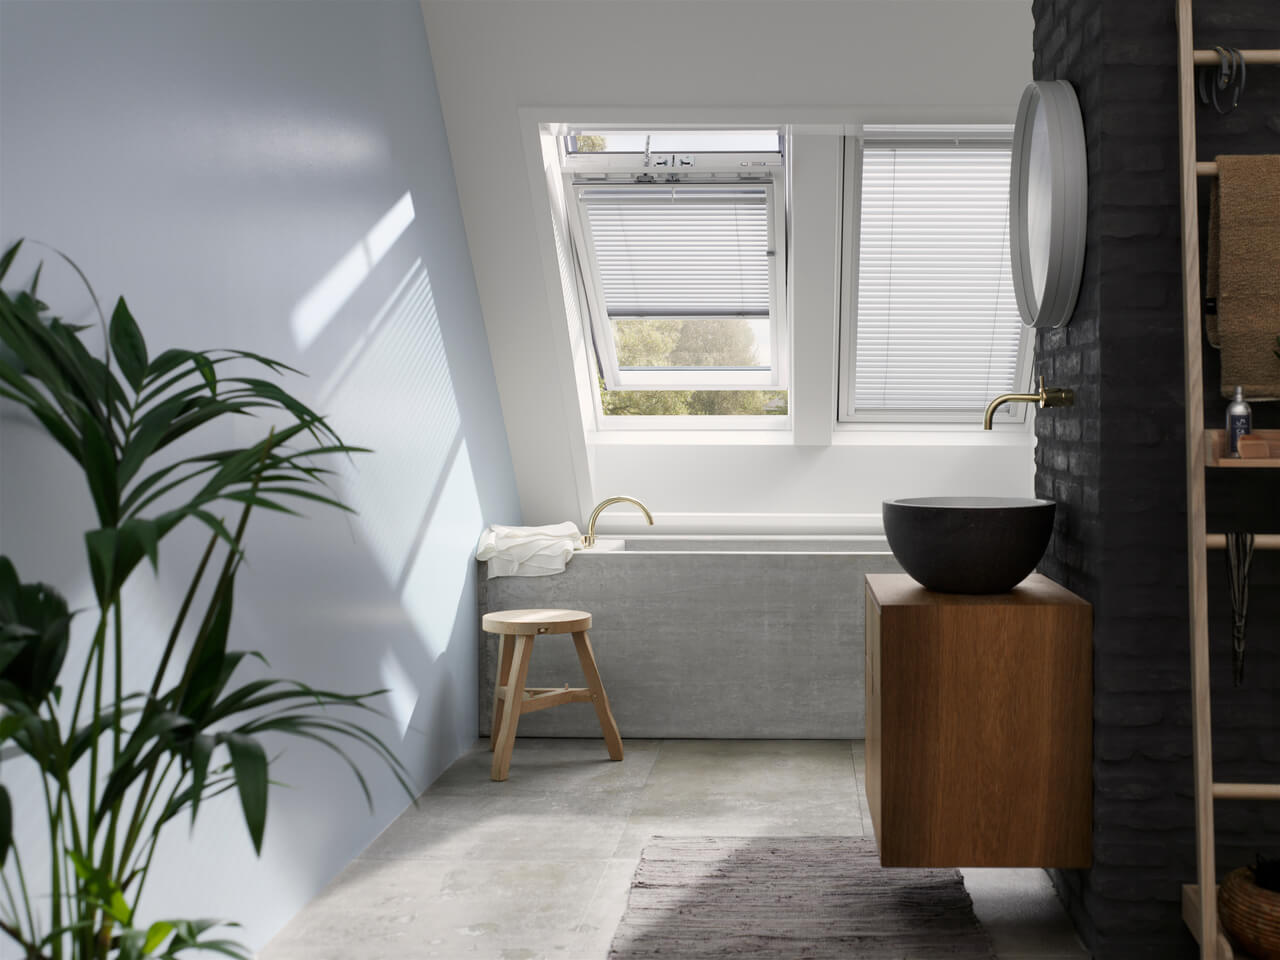 Modern bathroom with VELUX skylight, circular mirror, and wooden vanity unit.